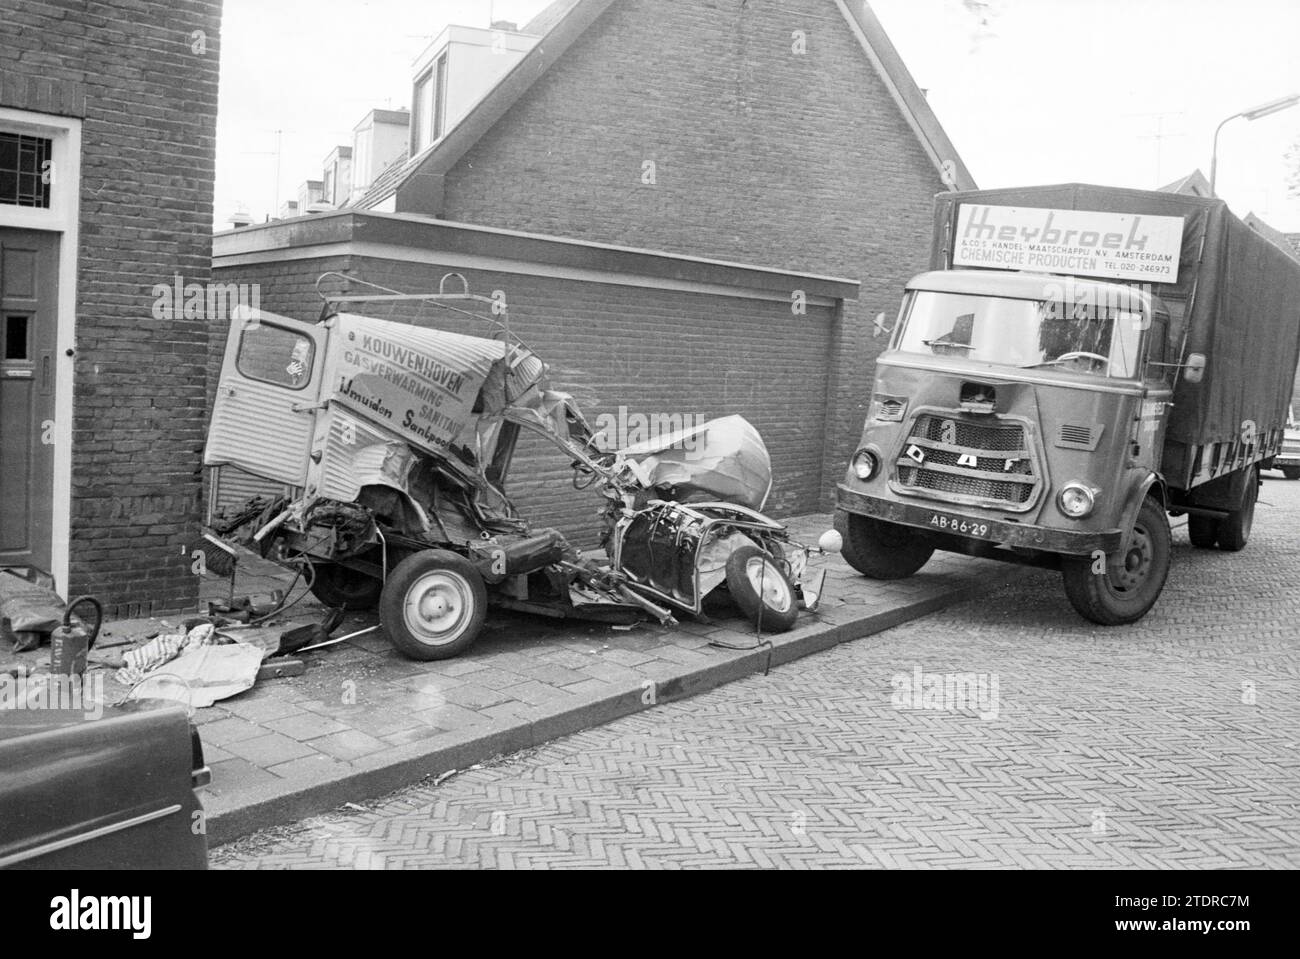 Car crashed., 00-05-1972, Whizgle News from the Past, Tailored for the Future. Explore historical narratives, Dutch The Netherlands agency image with a modern perspective, bridging the gap between yesterday's events and tomorrow's insights. A timeless journey shaping the stories that shape our future Stock Photo